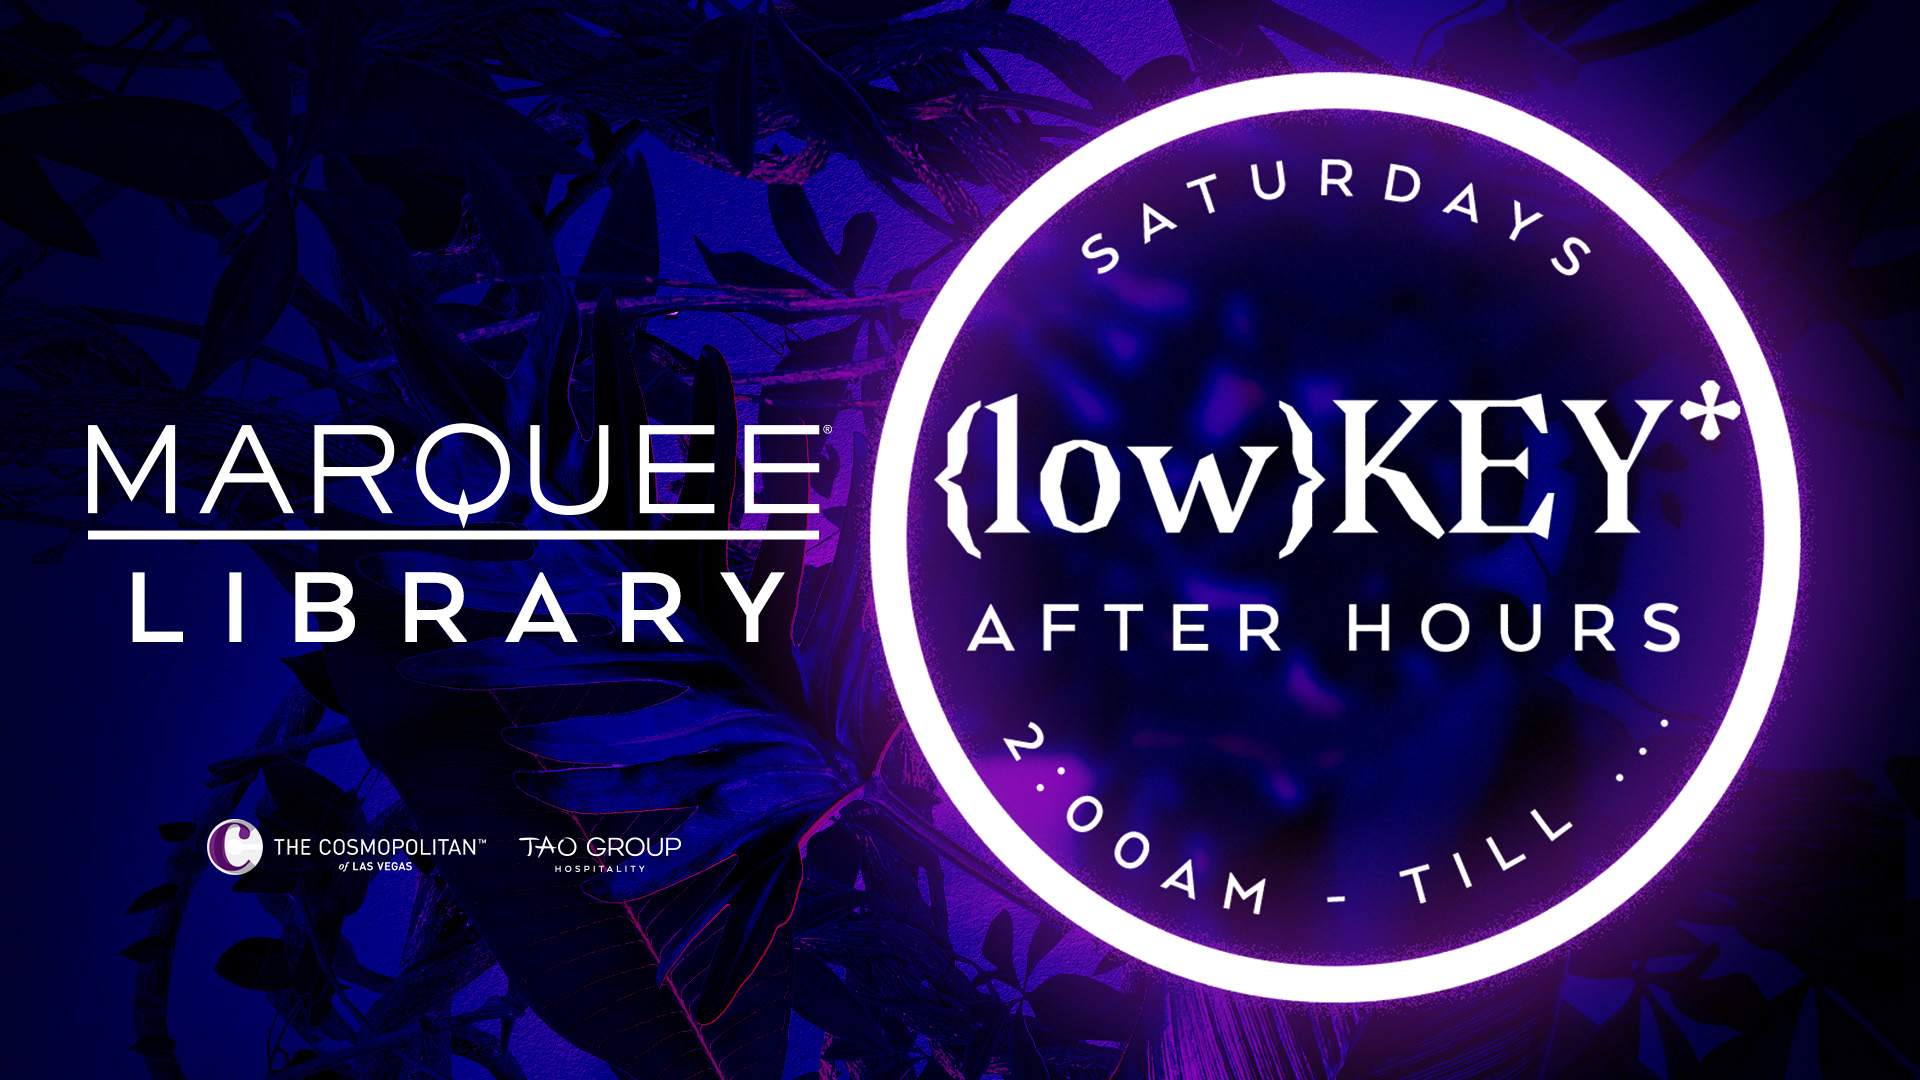 Lowkey After Hours - フライヤー表